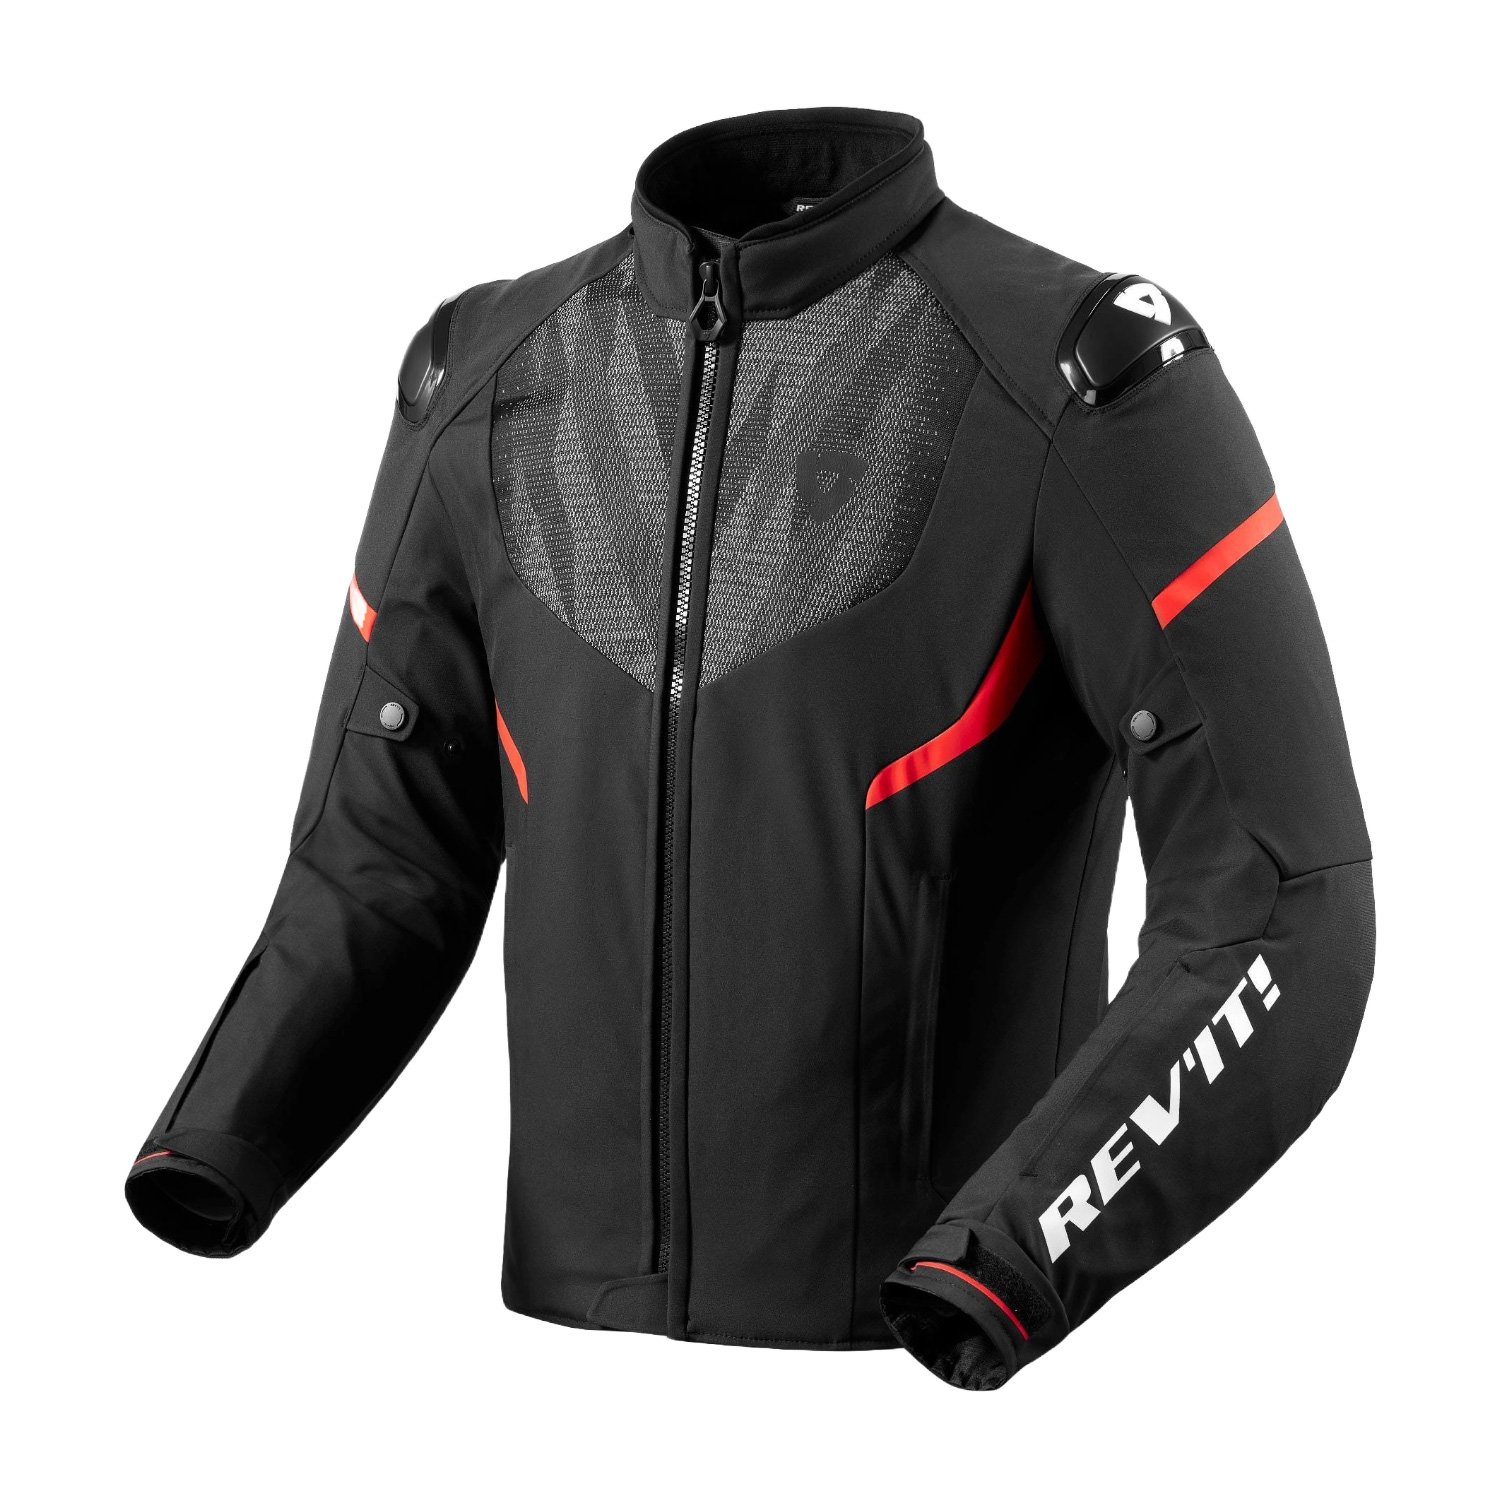 Image of REV'IT! Hyperspeed 2 H2O Jacket Black Neon Red Size S ID 8700001367226